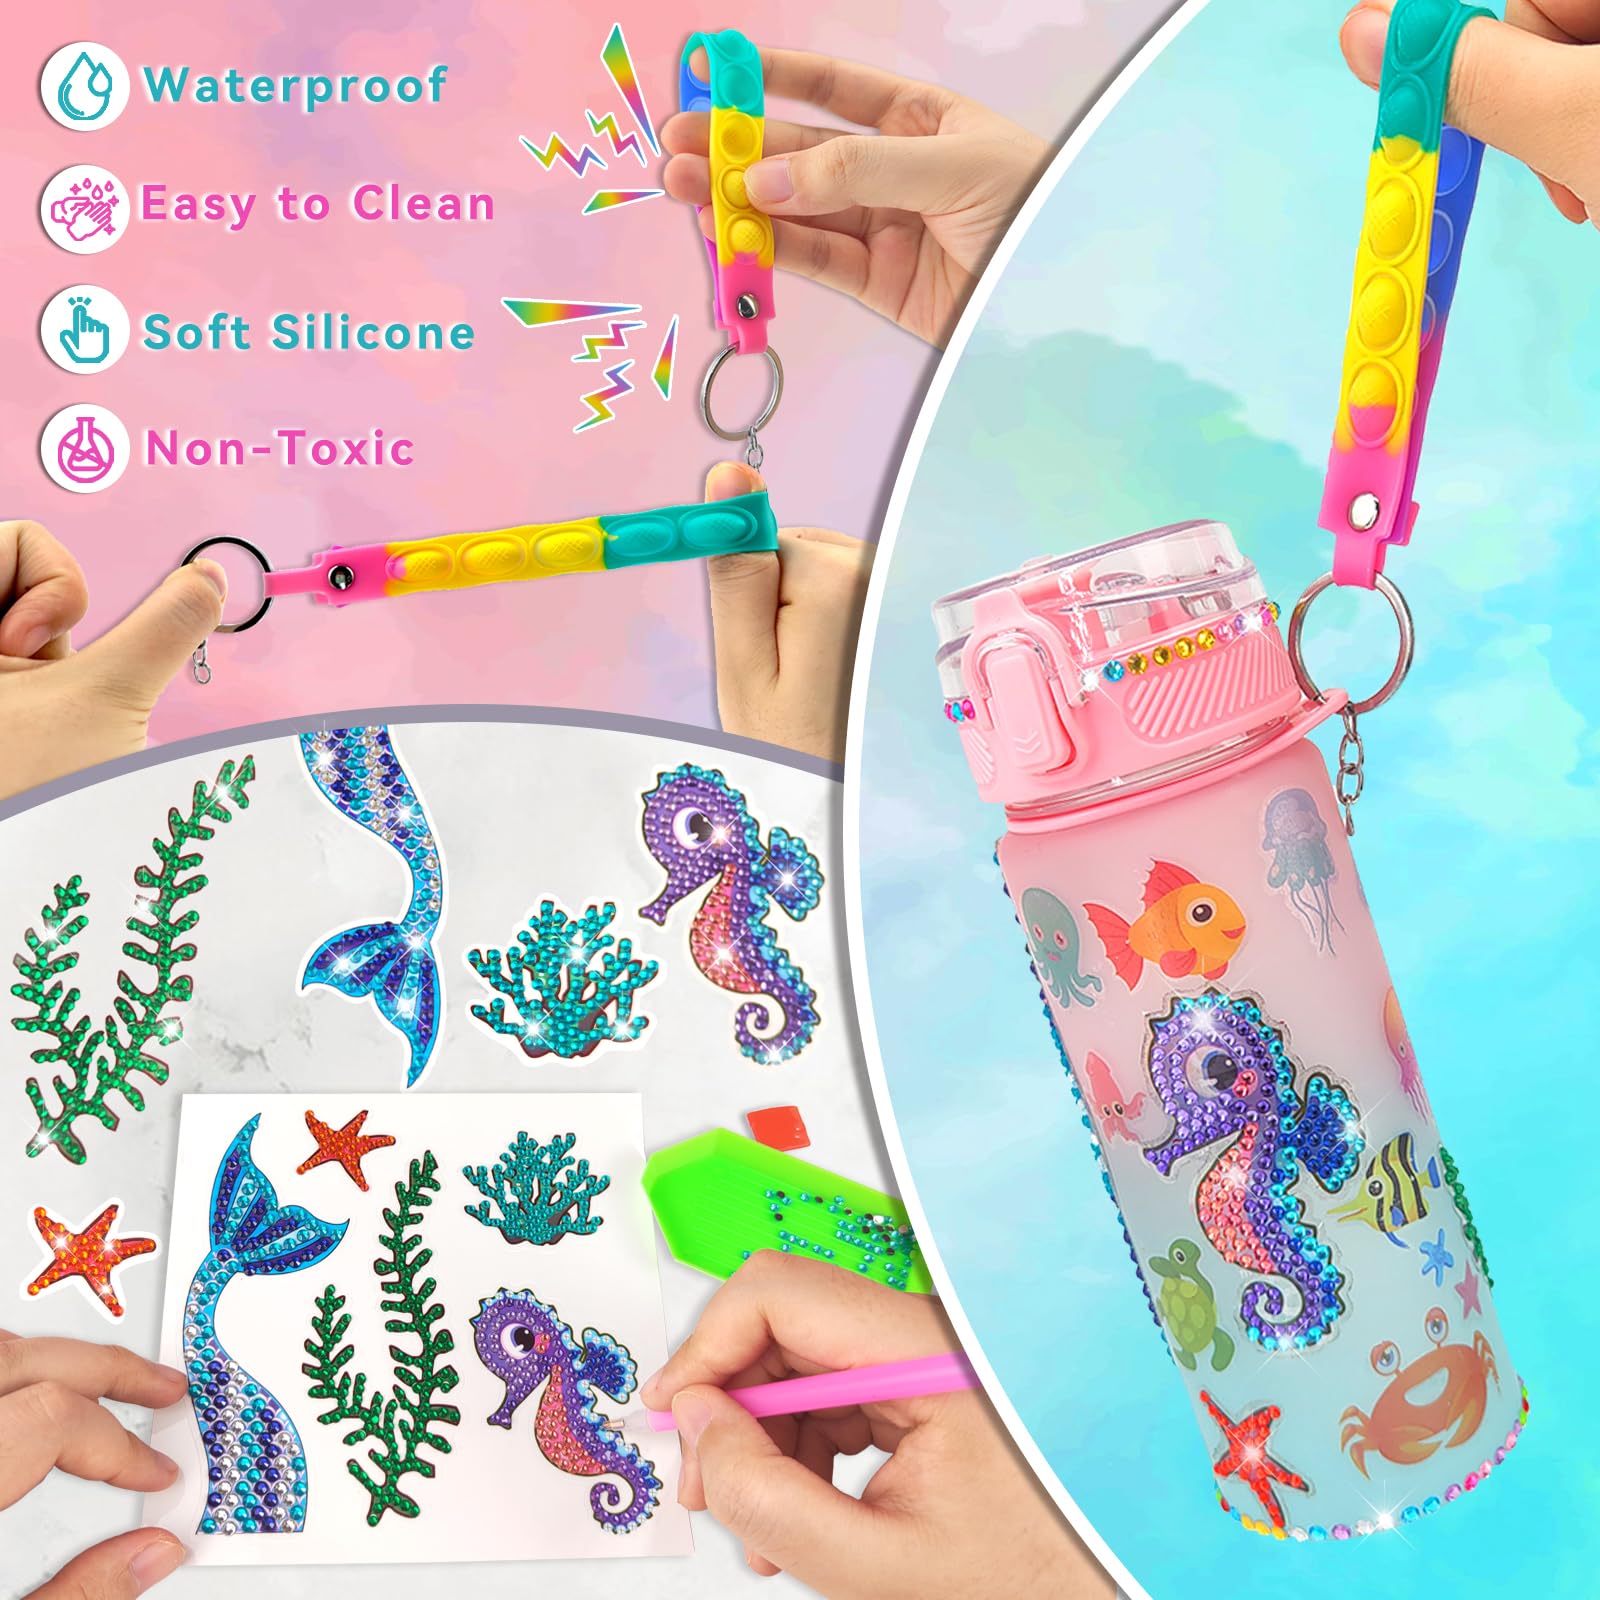 Edsportshouse Decorate Your Own Water Bottle Kits For Girls Age 4